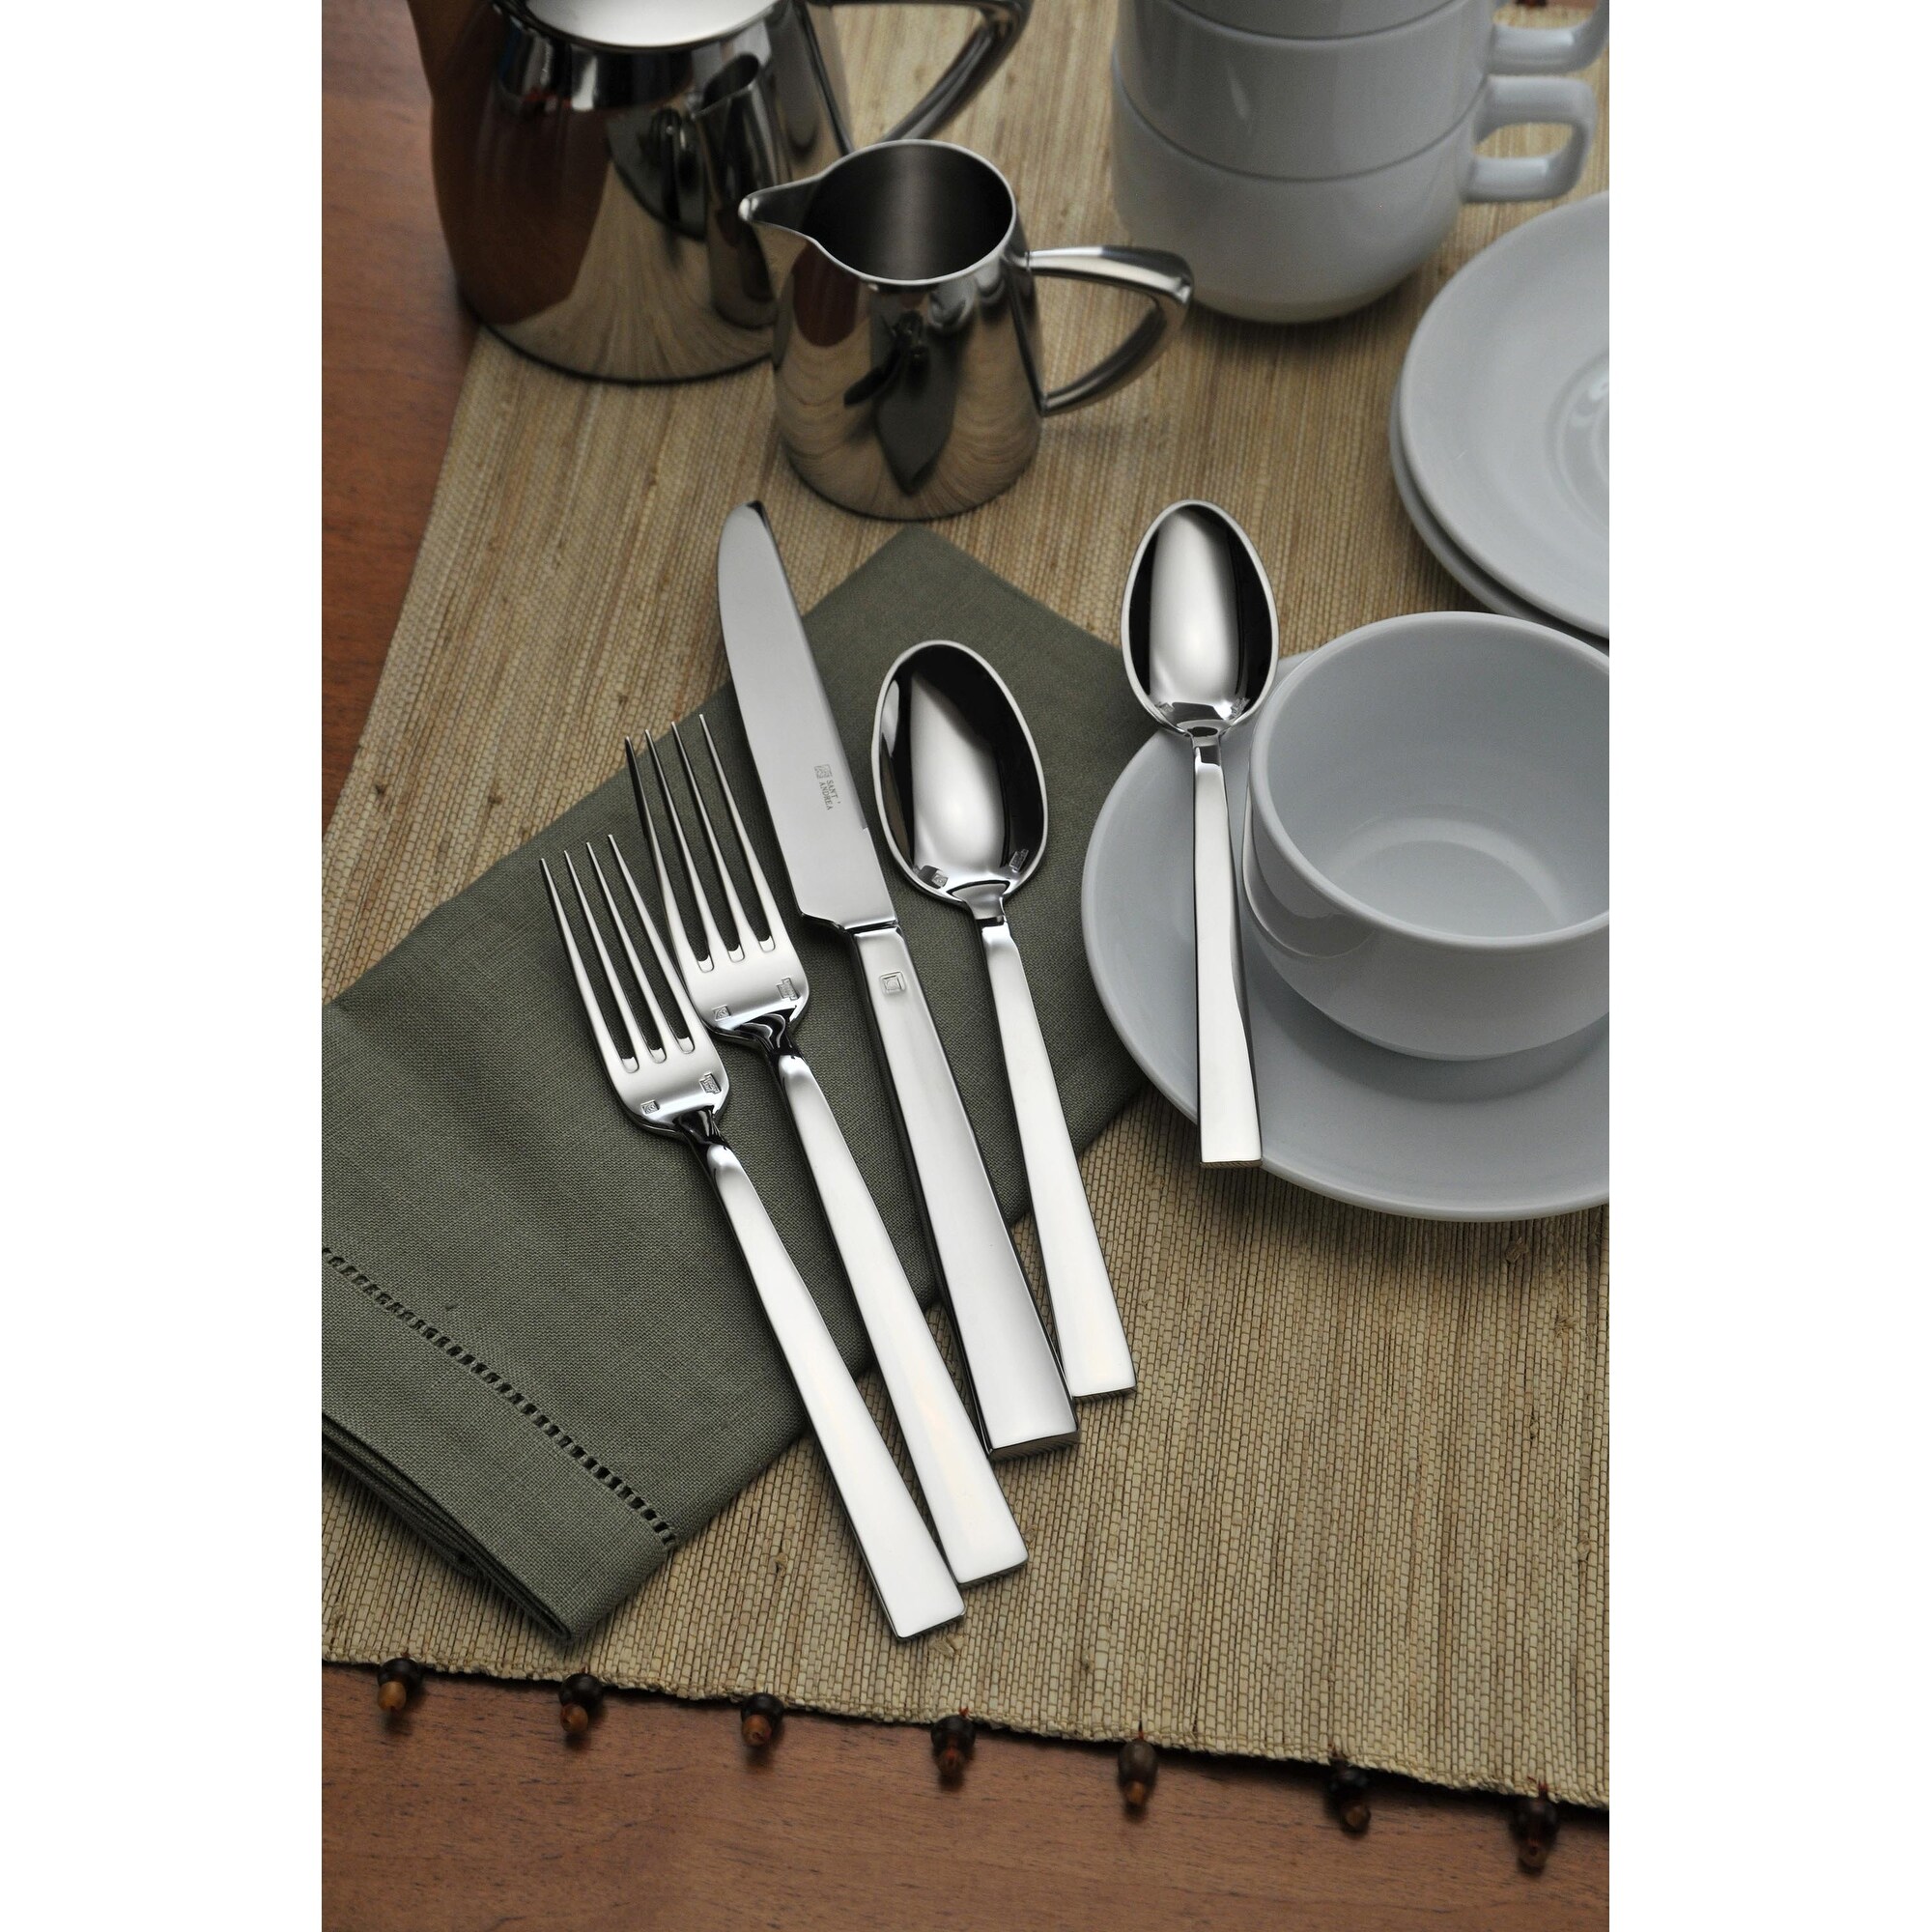 Sant' Andrea Stainless Steel Elevation Iced Tea Spoons (Set of 12) by Oneida